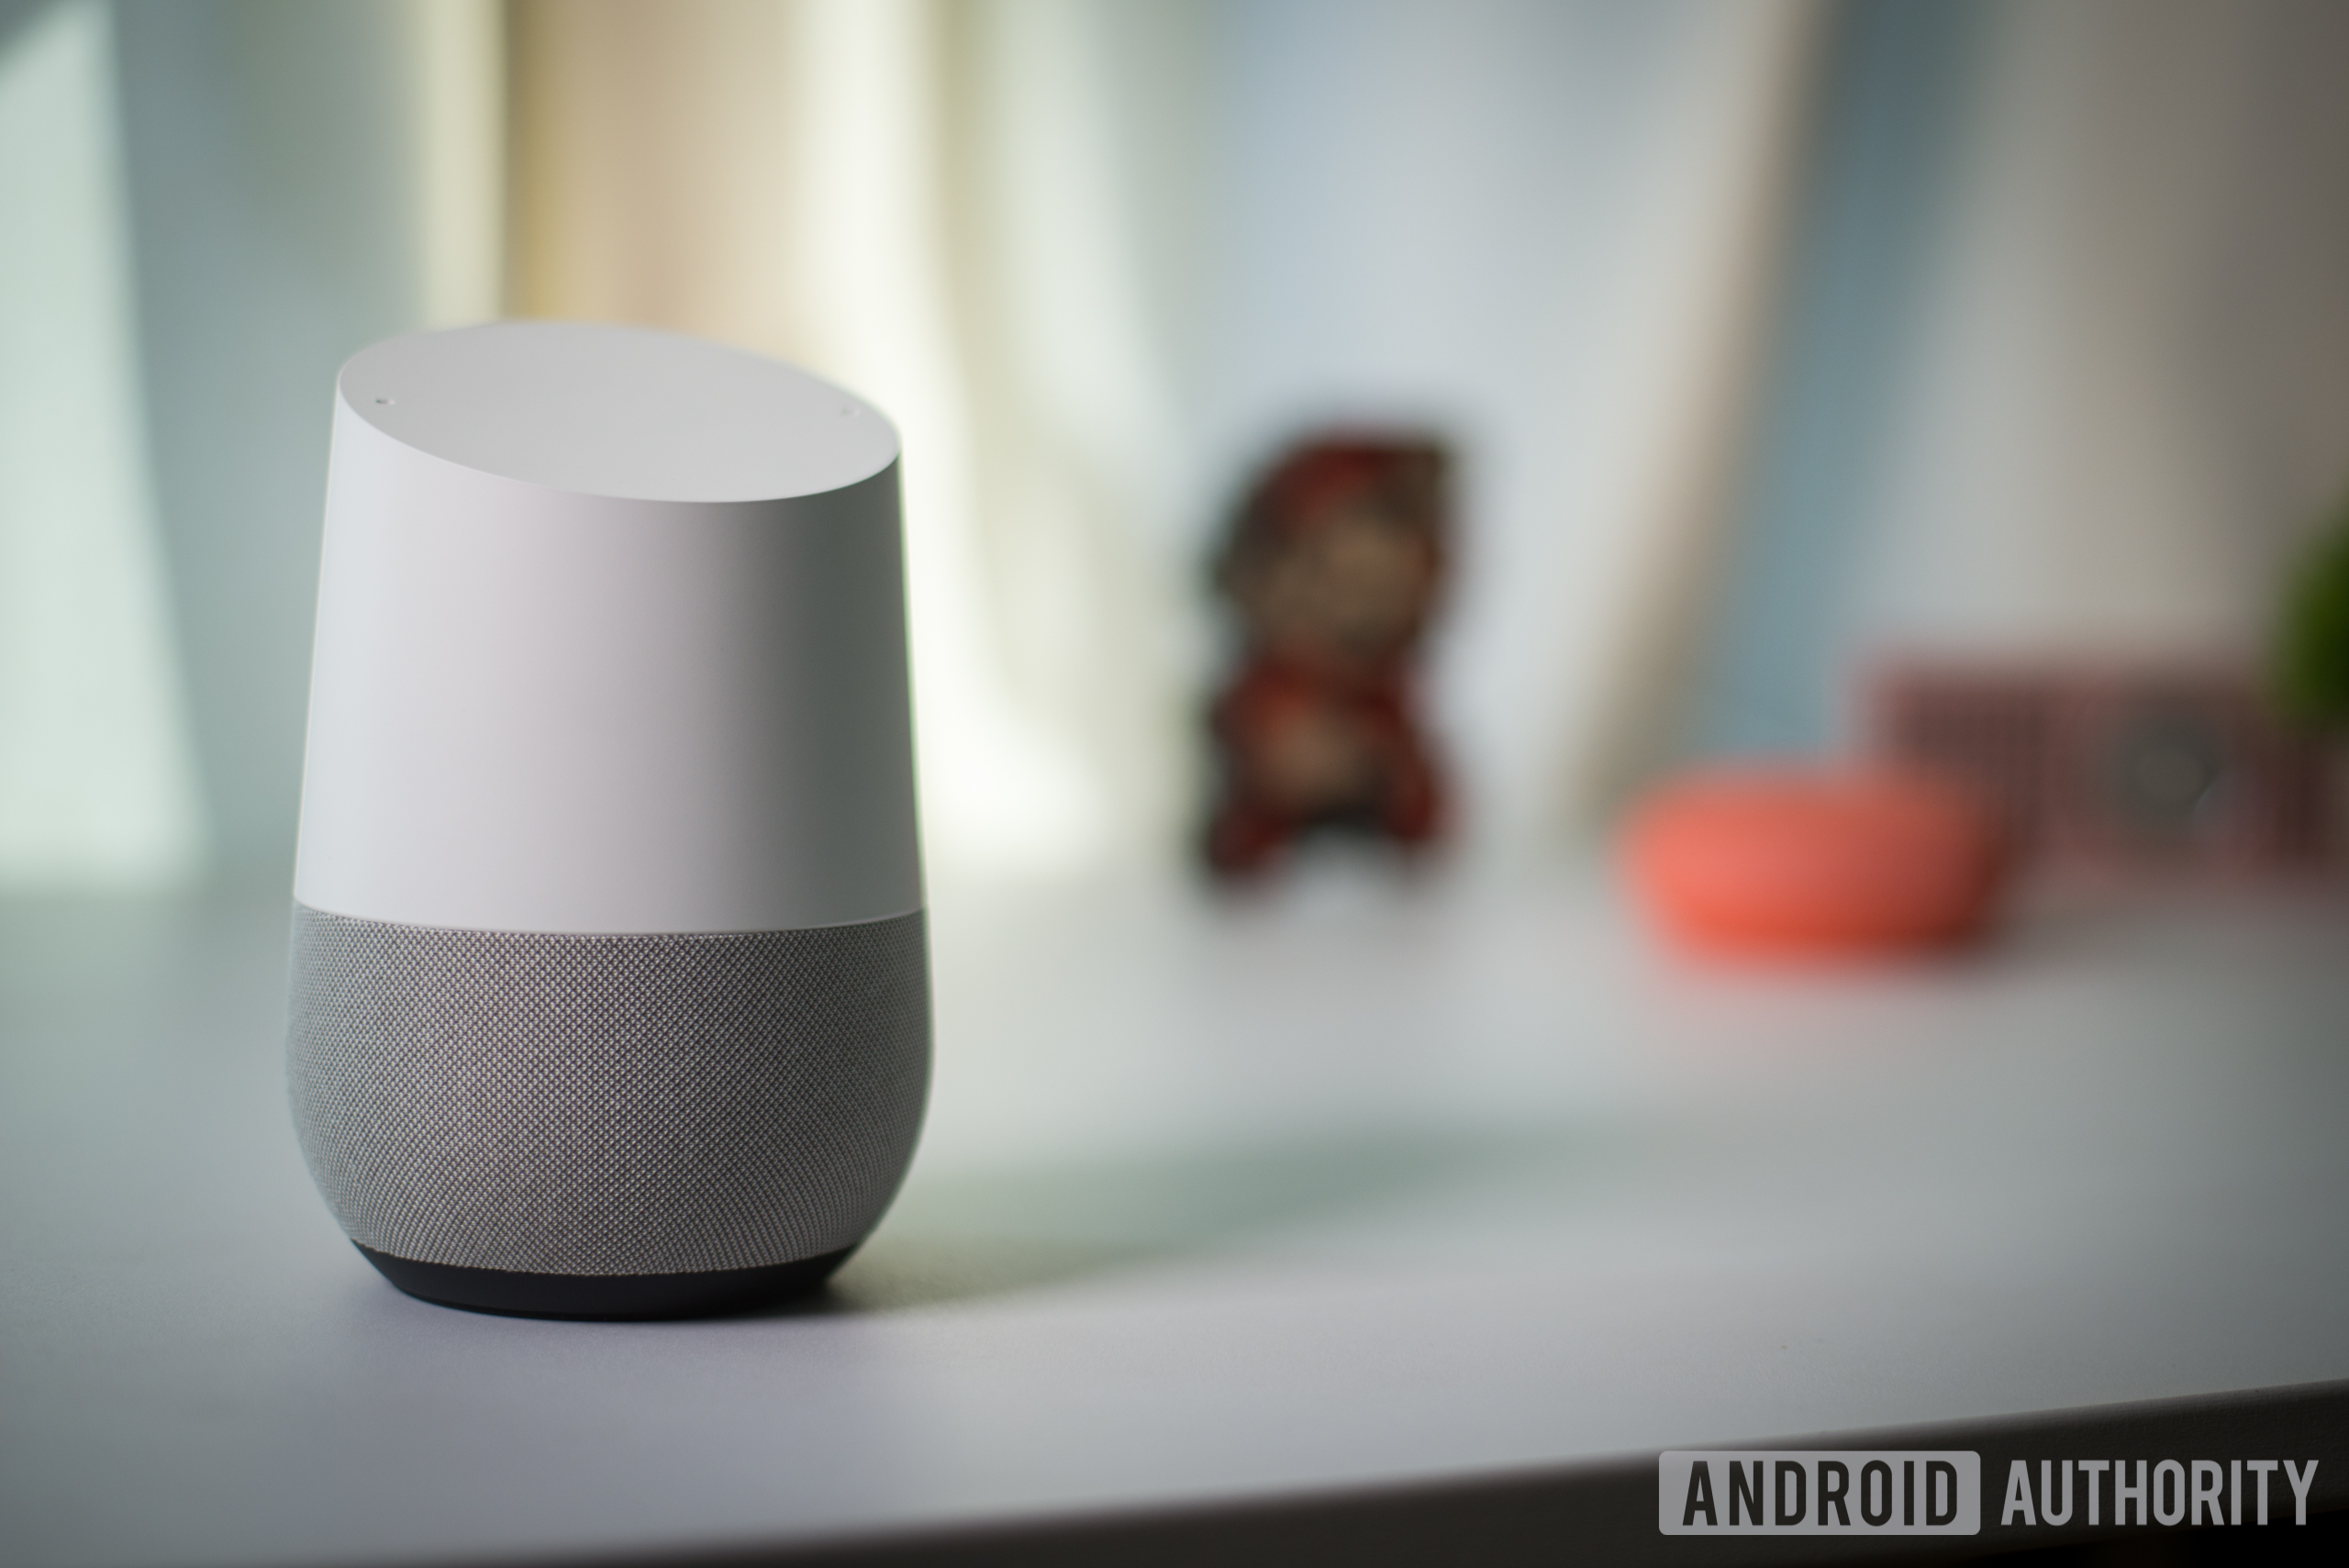 39m Americans own a voice-activated smart speaker